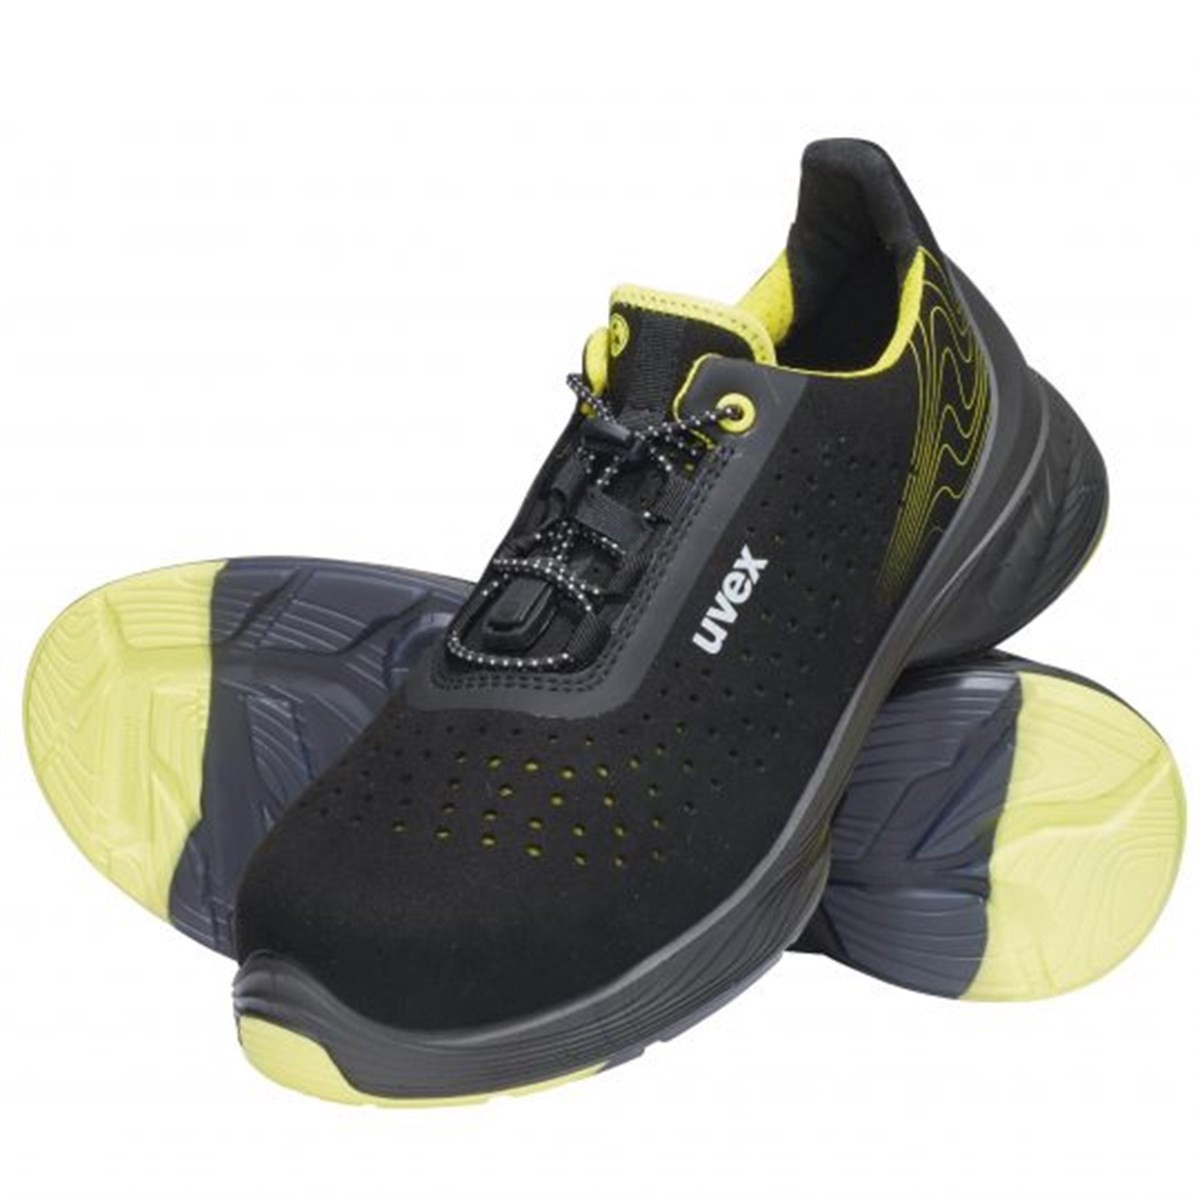 UVEX 1 G2 6843 S1 SRC ESD WORK SHOES